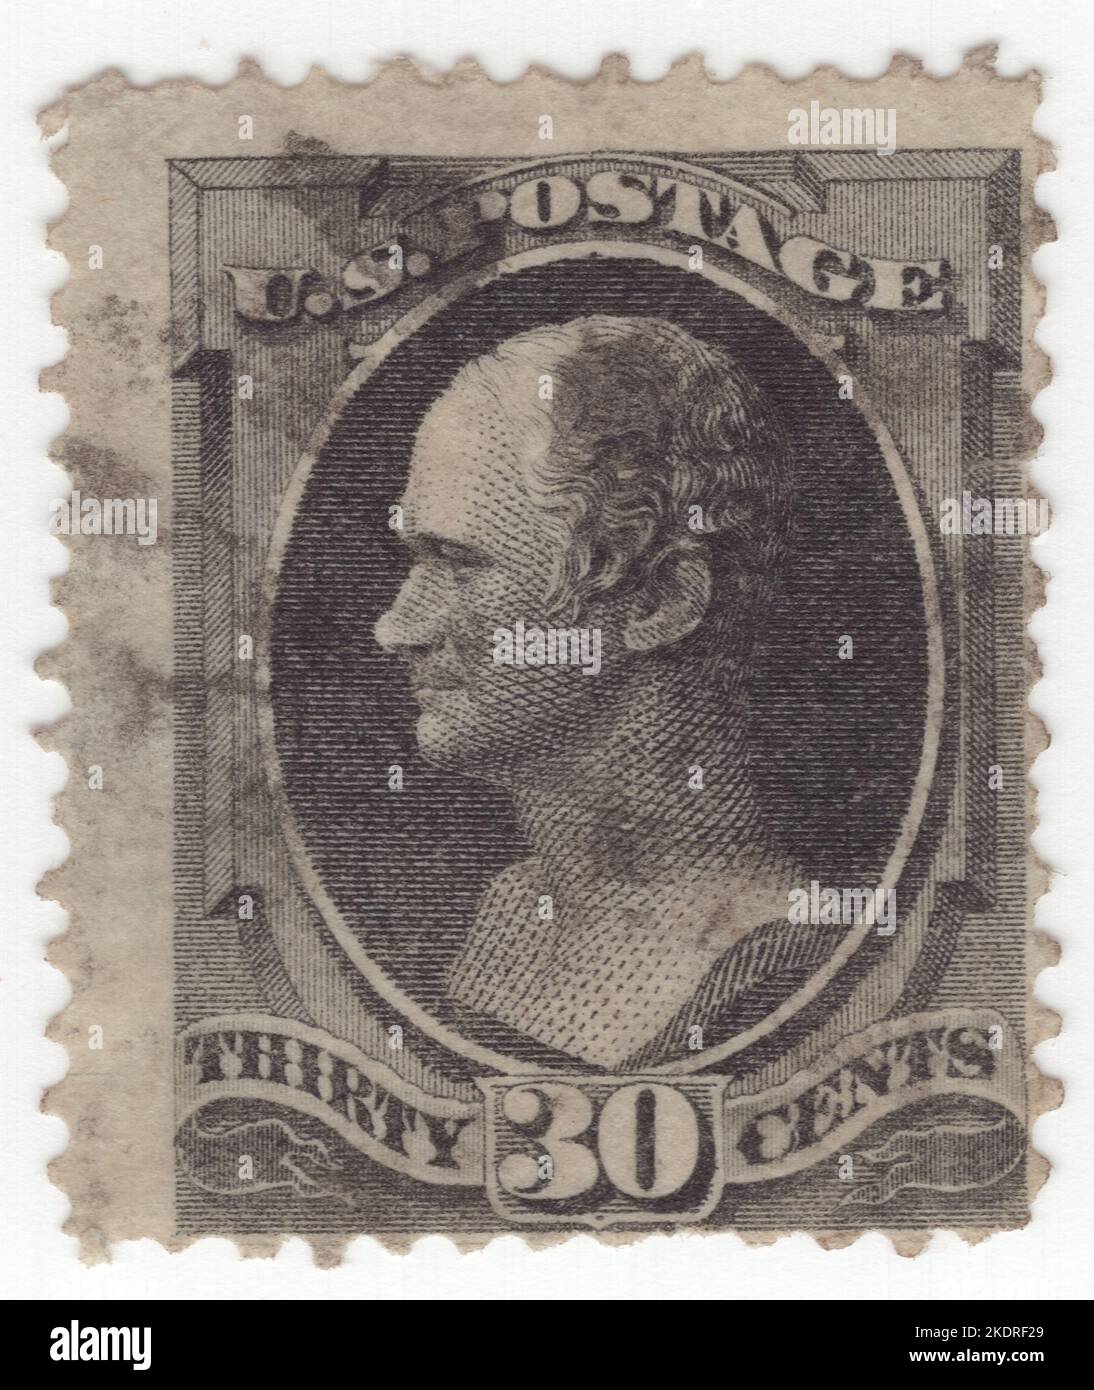 USA - 1873: An 30 cents grey-black postage stamp depicting portrait of Alexander Hamilton, American revolutionary, statesman and Founding Father of the United States. He was an influential interpreter and promoter of the U.S. Constitution, and was the founder of the Federalist Party, the nation's financial system, the United States Coast Guard, and the New York Post newspaper. As the first secretary of the treasury, Hamilton was the main author of the economic policies of the administration of President George Washington Stock Photo